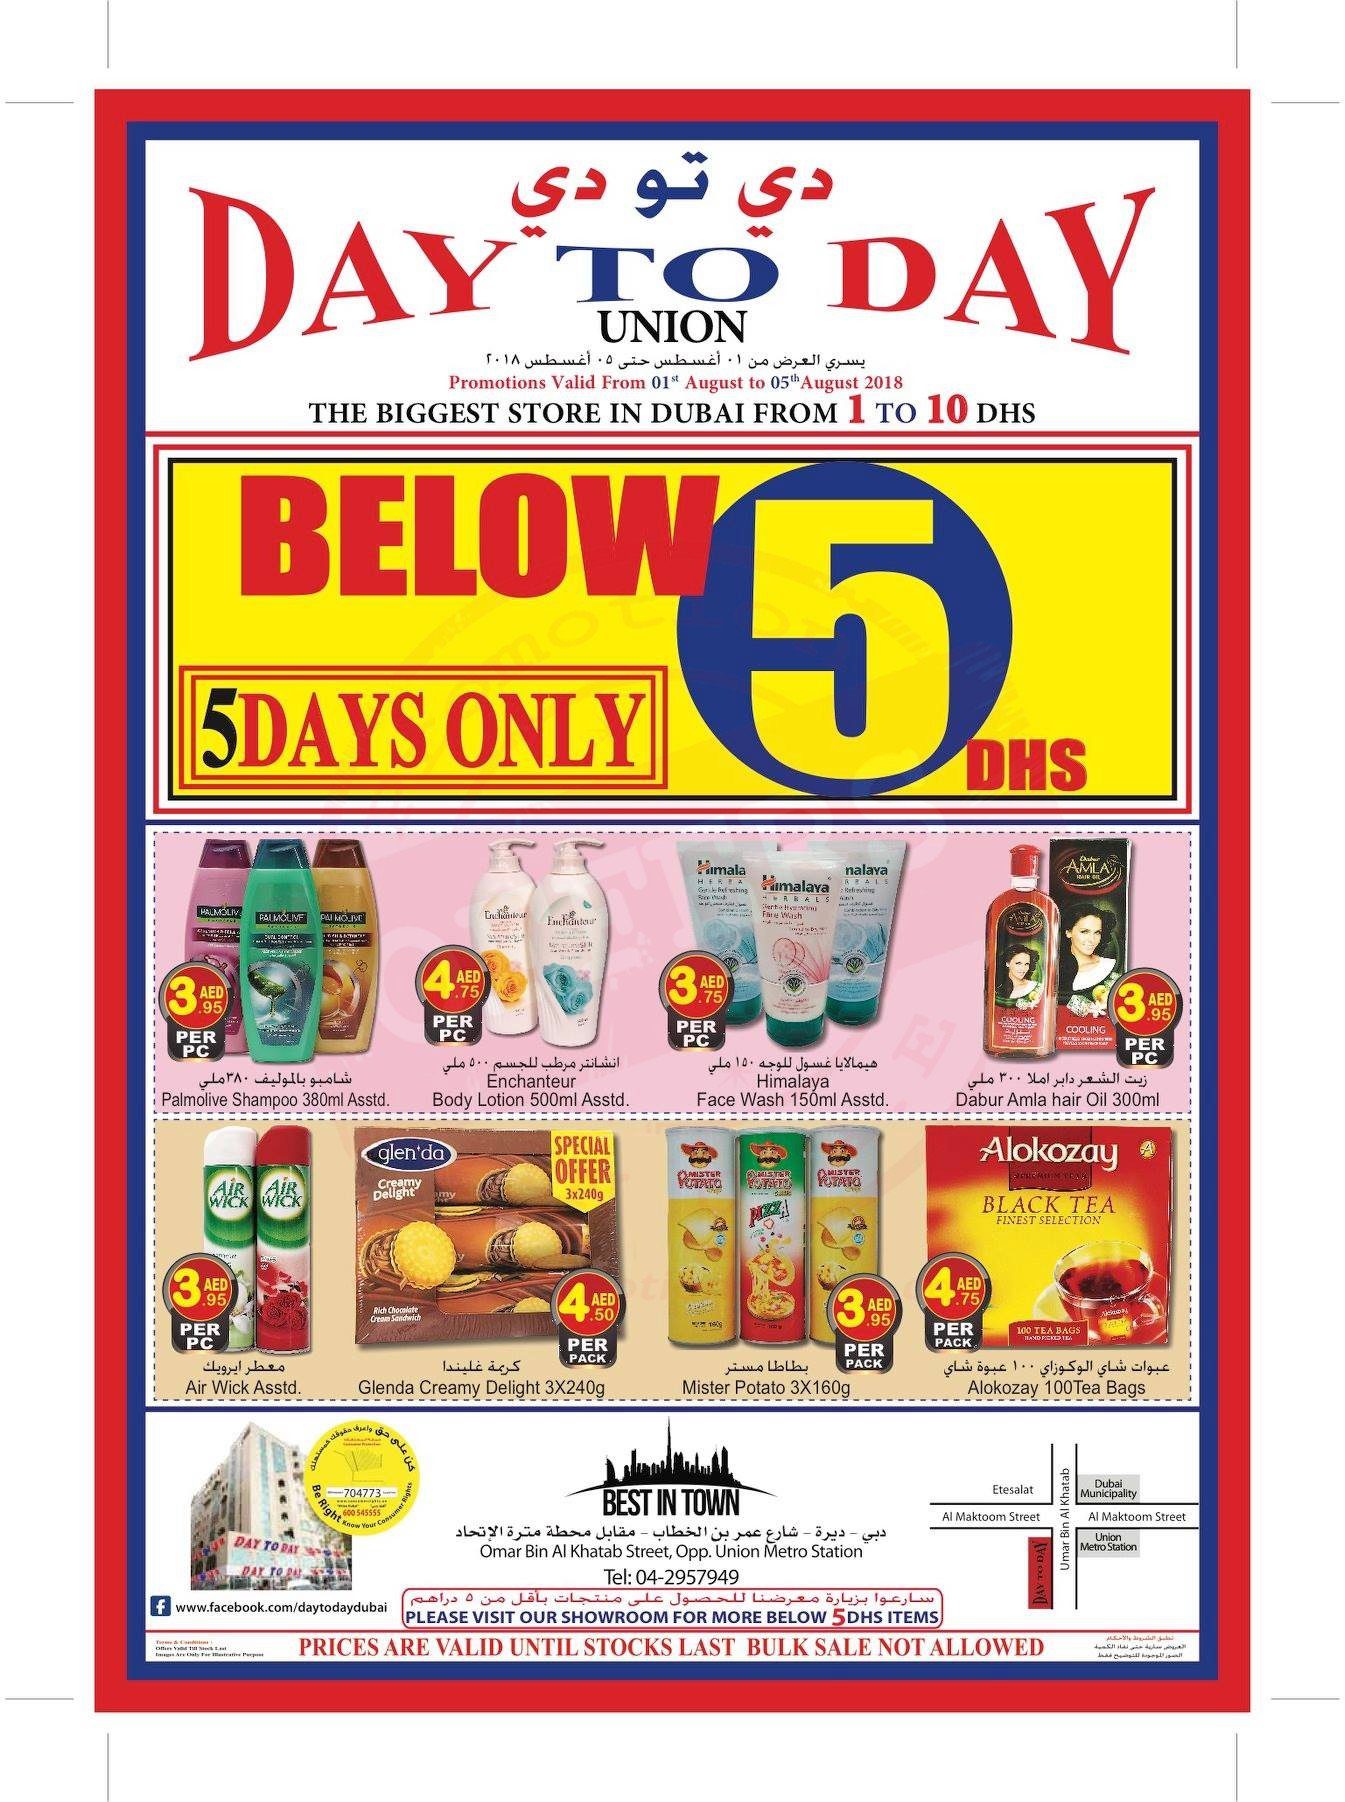 DAY TO DAY BELOW 5 DIRHAMS SALE